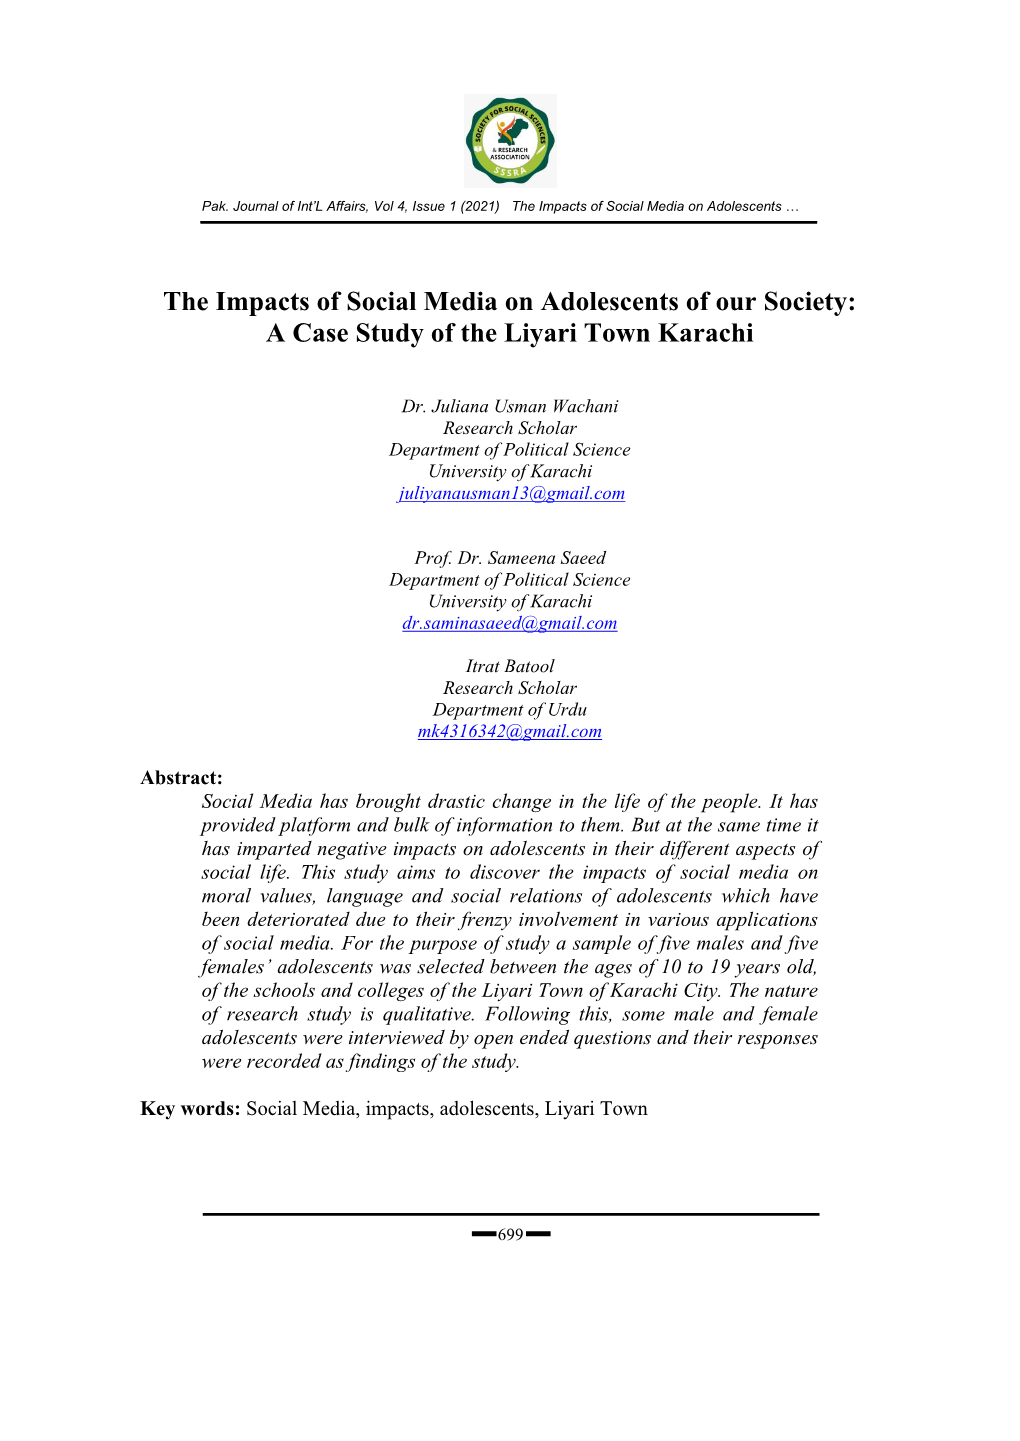 The Impacts of Social Media on Adolescents of Our Society: a Case Study of the Liyari Town Karachi